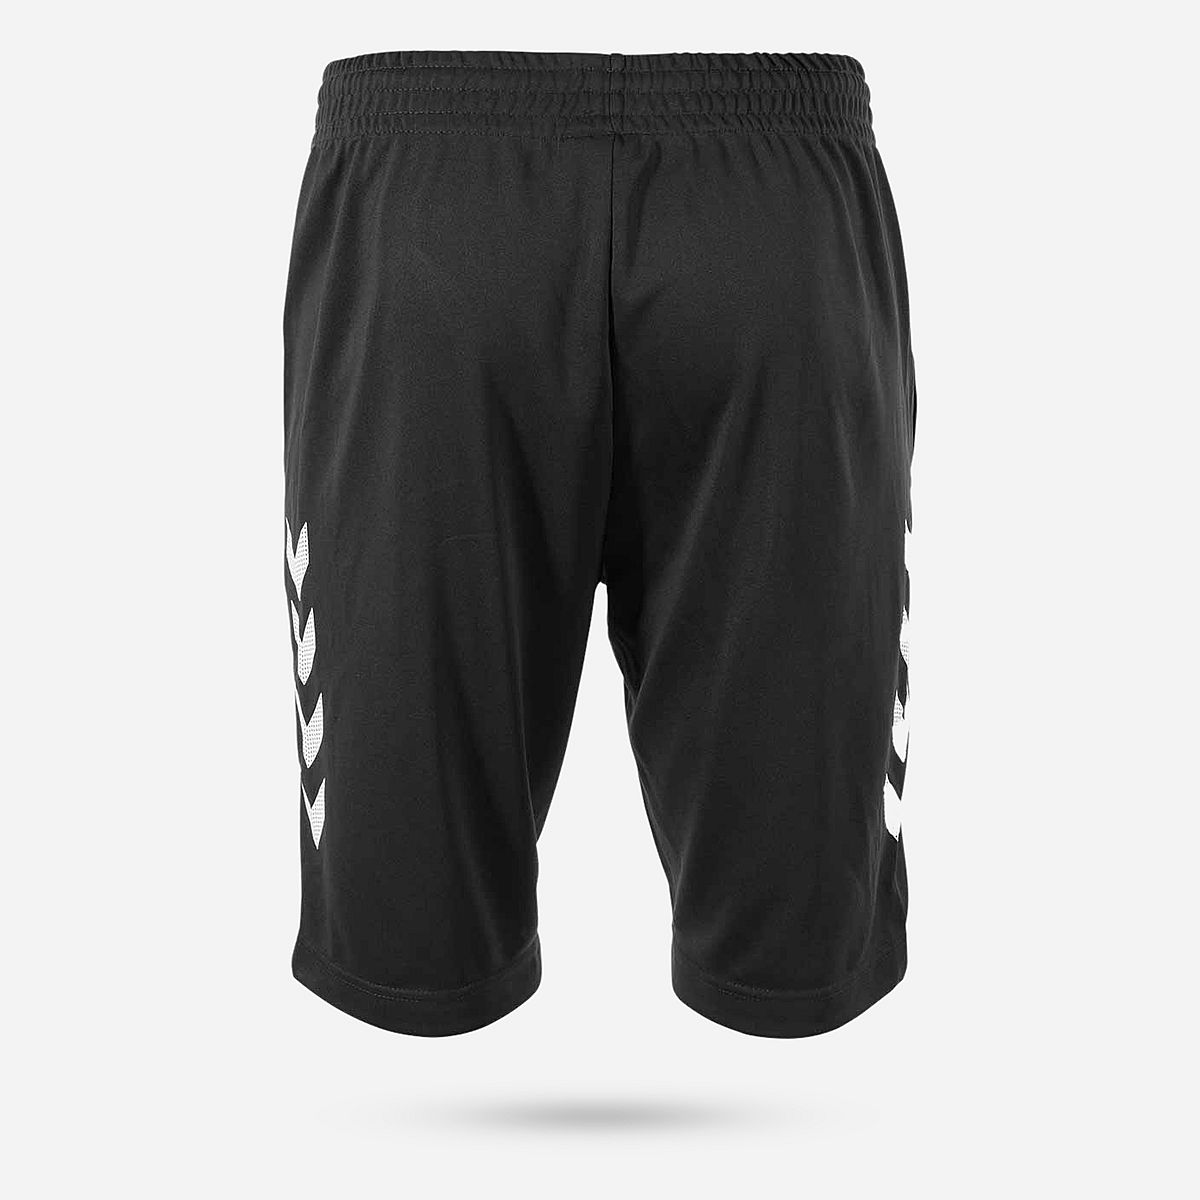 AN229870 Authentic Training Short